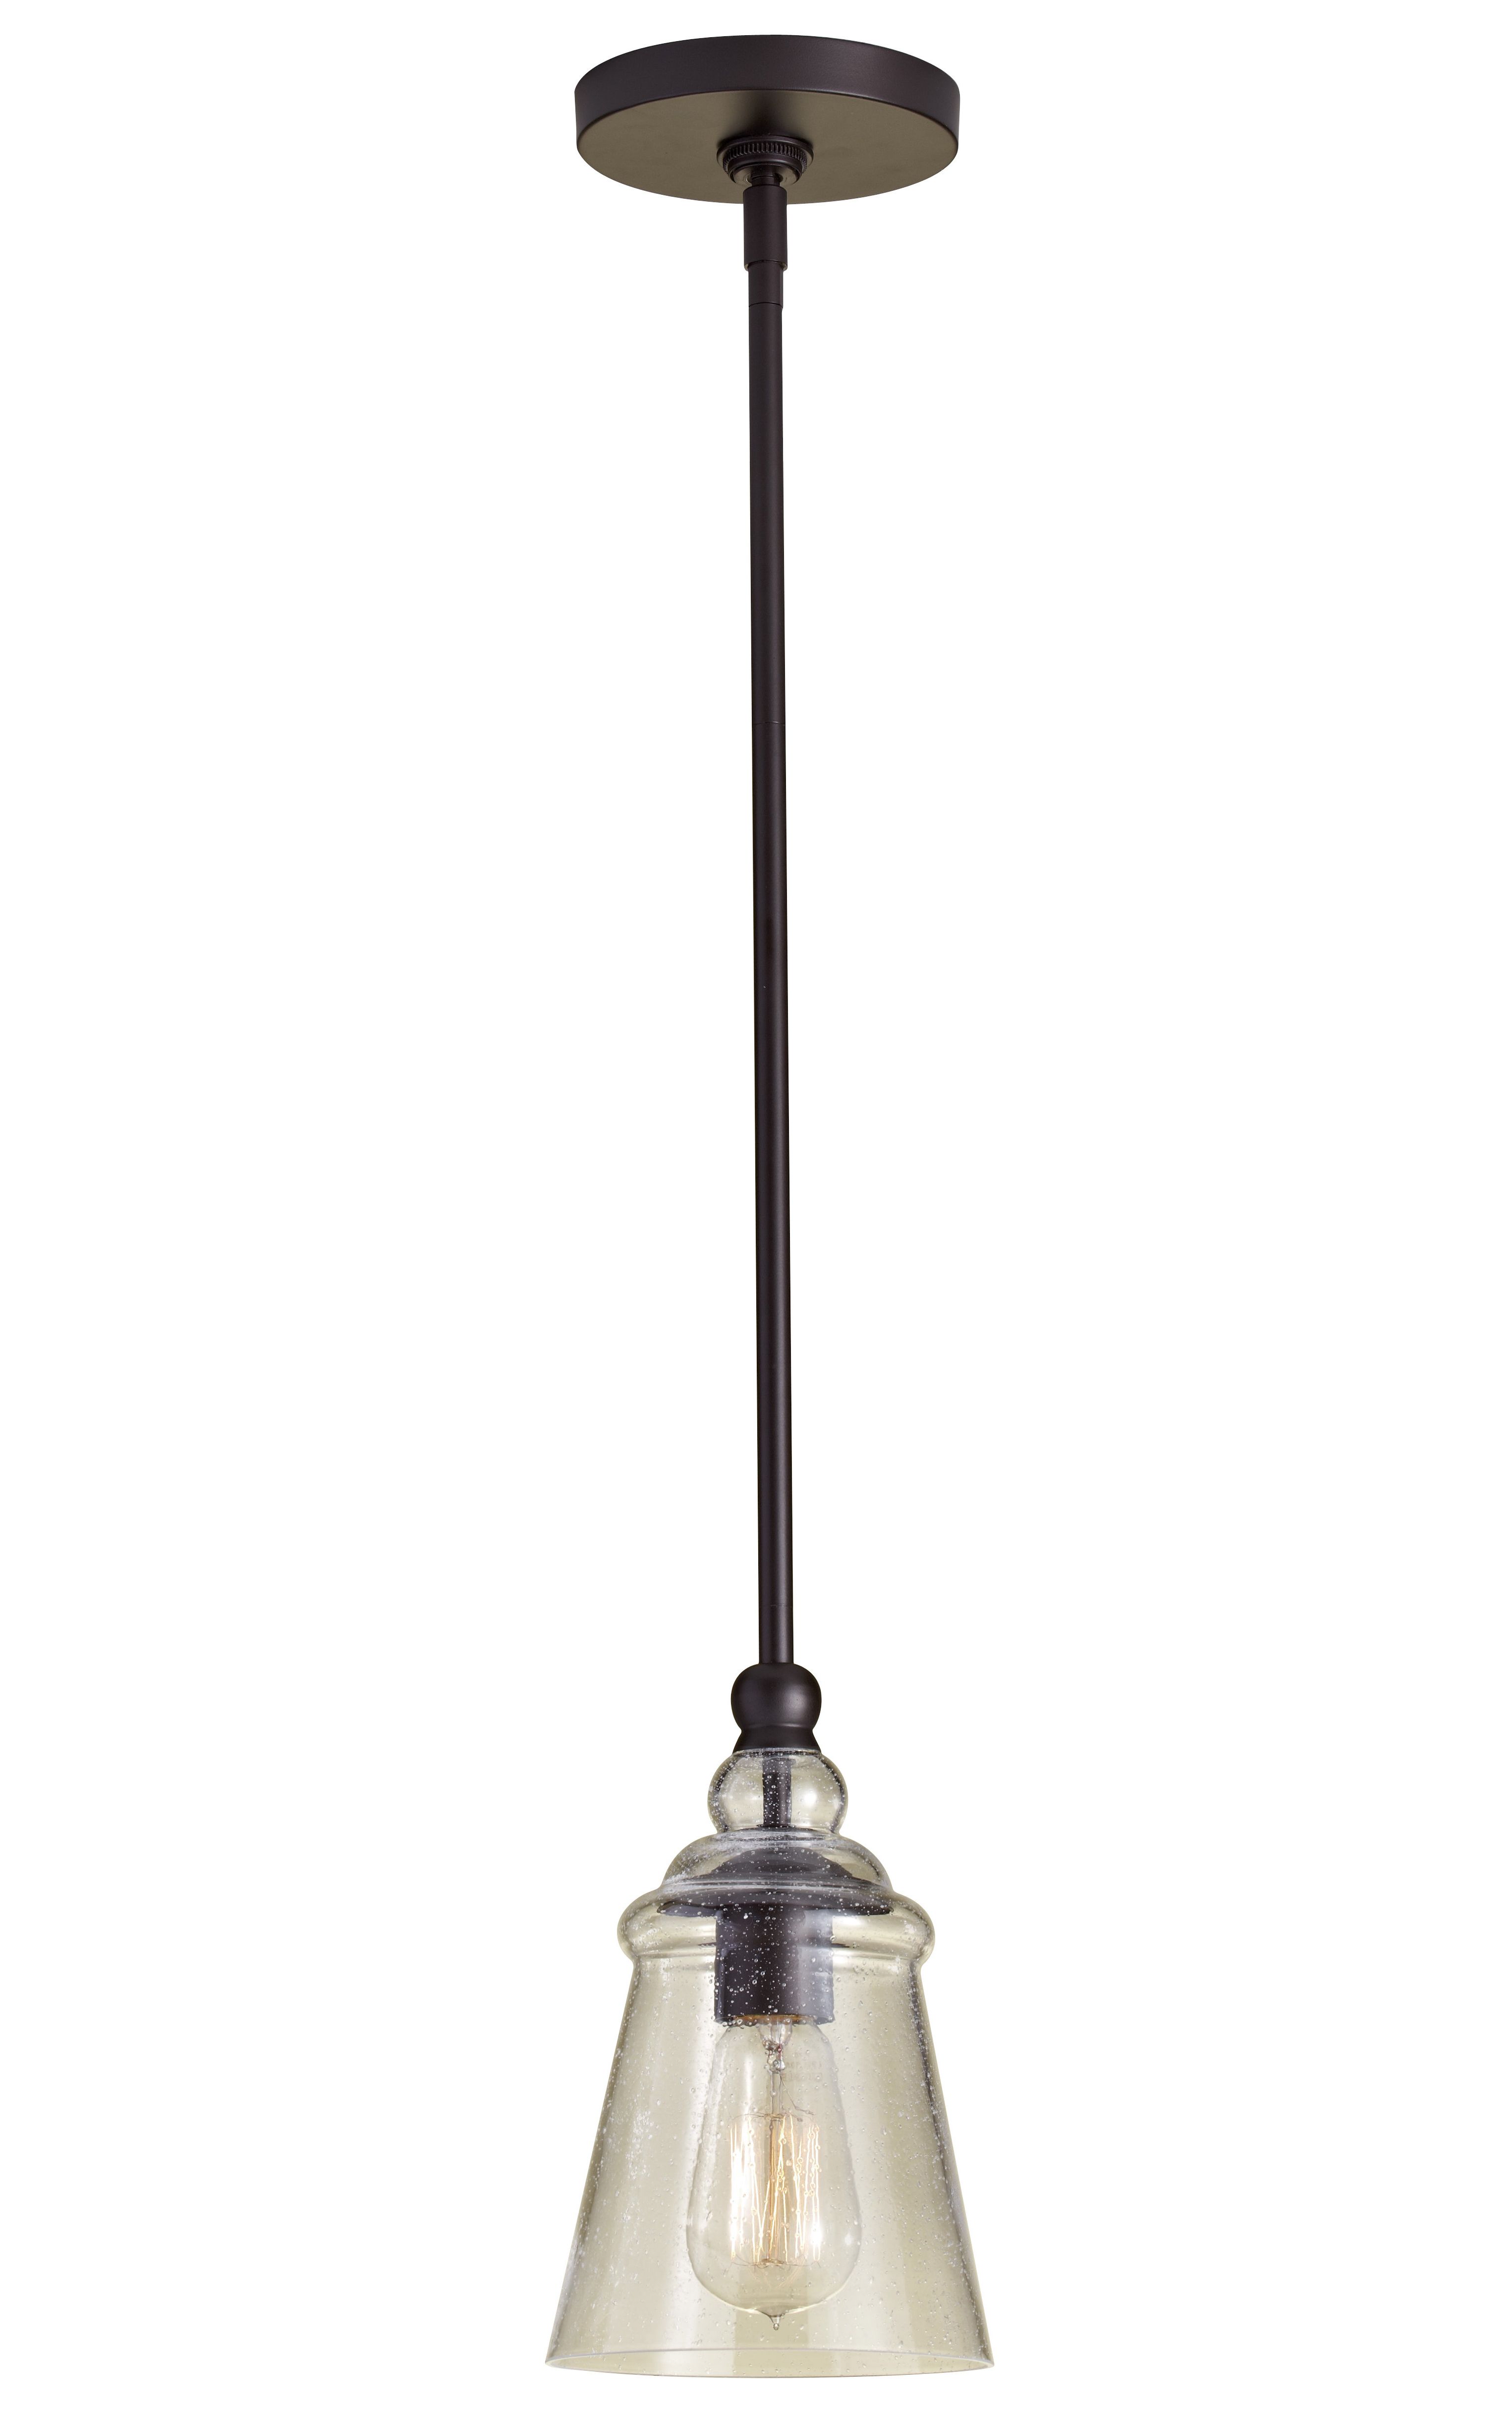 Houon 1 Light Cone Bell Pendants With Regard To Most Recent Sargent 1 Light Single Bell Pendant (View 7 of 25)